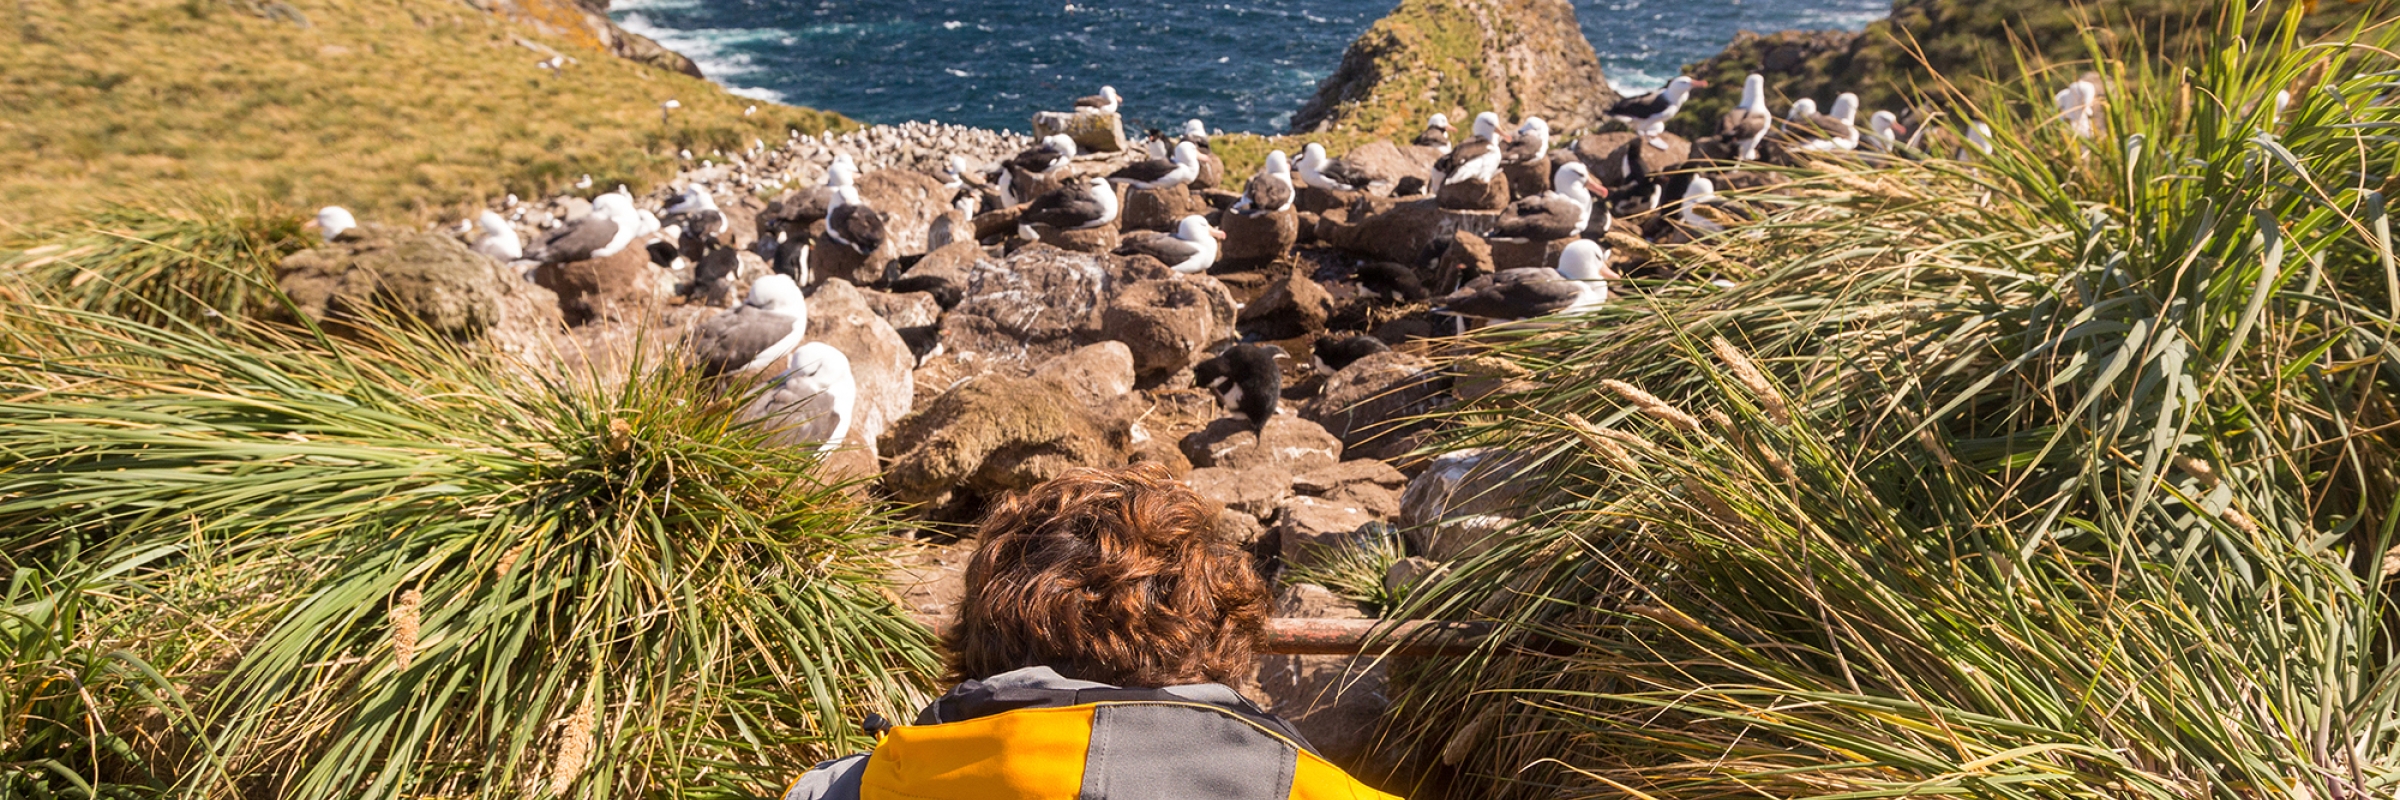 A guest photographs Black Browed Albatross at West Point Island, Falkland Islands. Photo by Acacia Johnson.